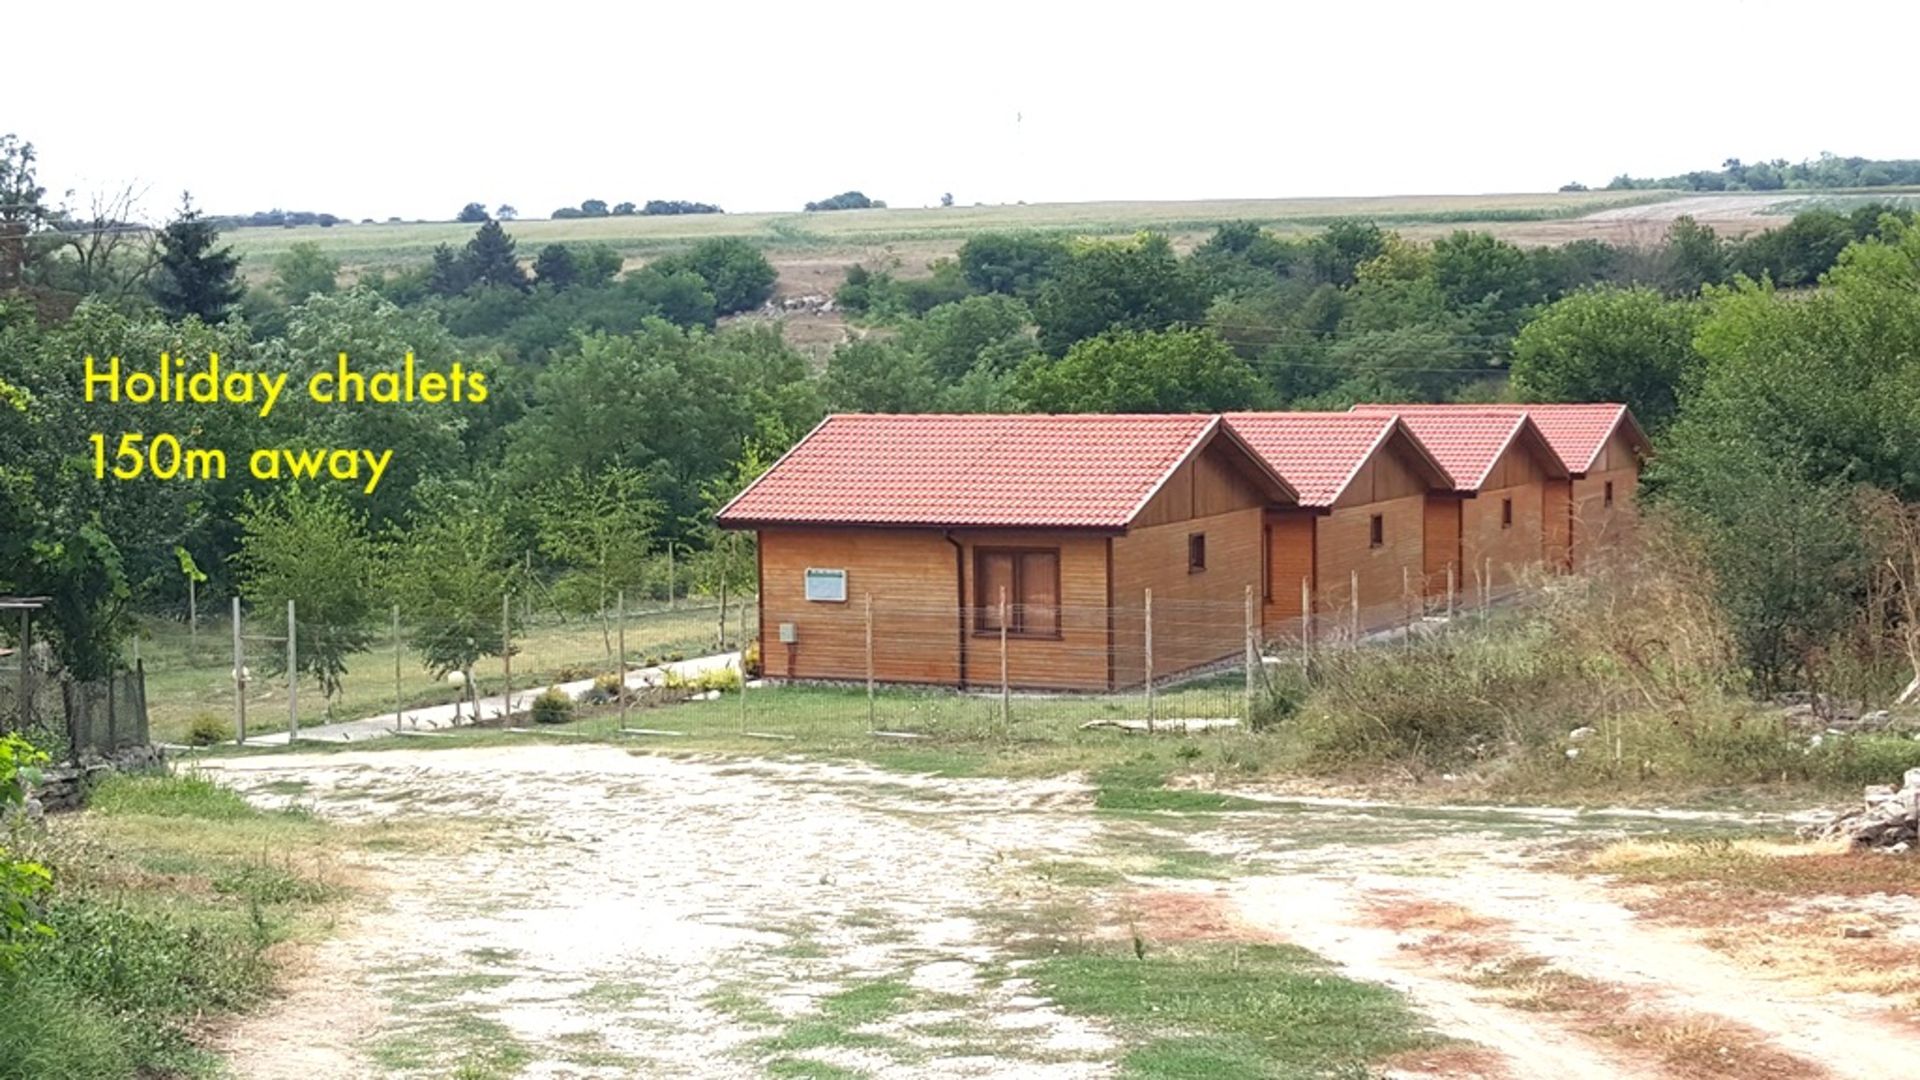 HOUSE AND 1,160 SQM OF LAND IN KRASEN, BULGARIA - Image 17 of 26